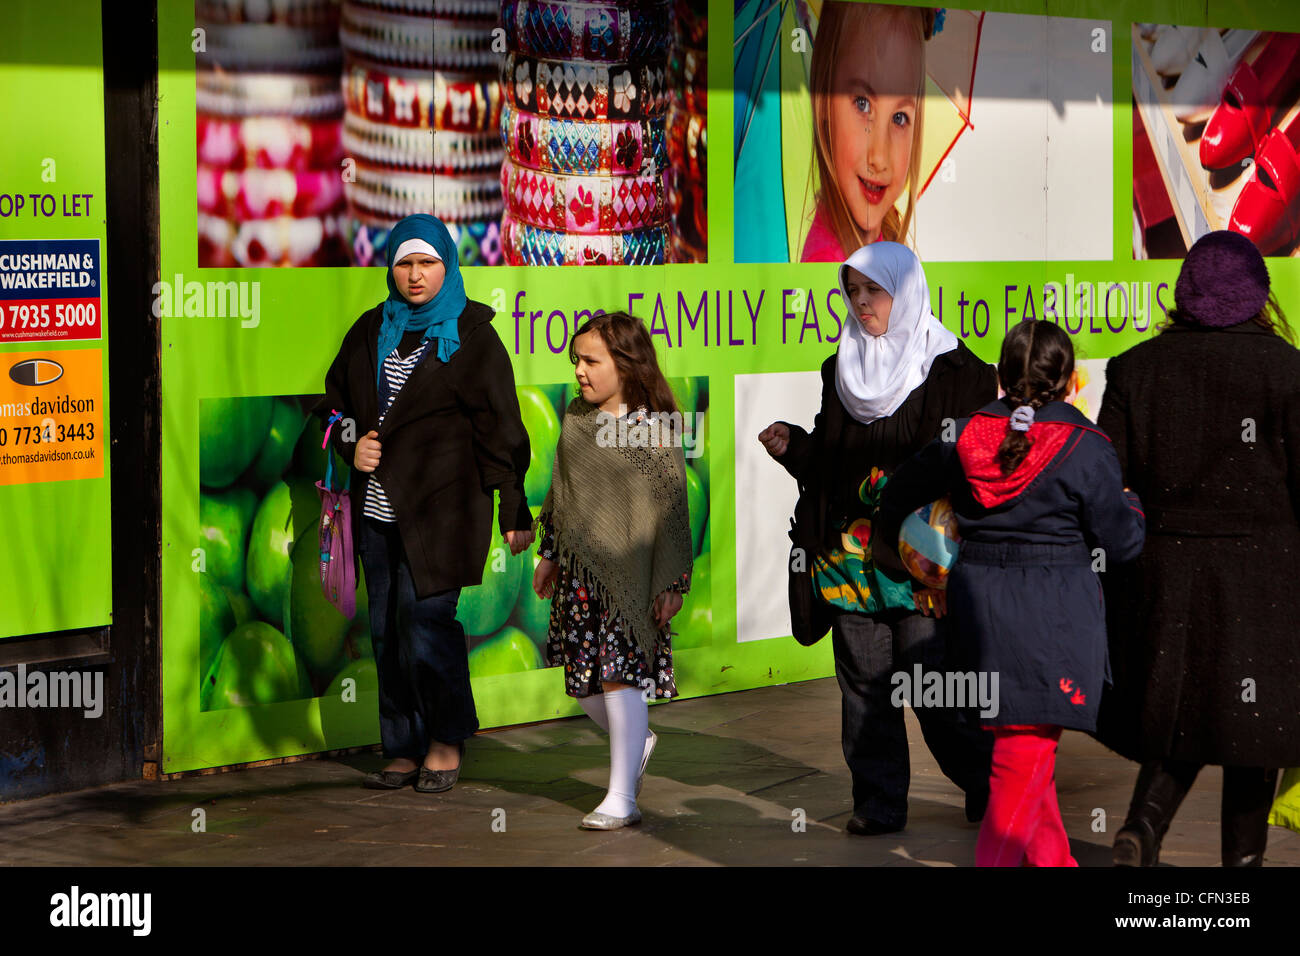 Multicultural shoppers on King street, Hammersmith, London, on a Sunday afternoon shop. Stock Photo